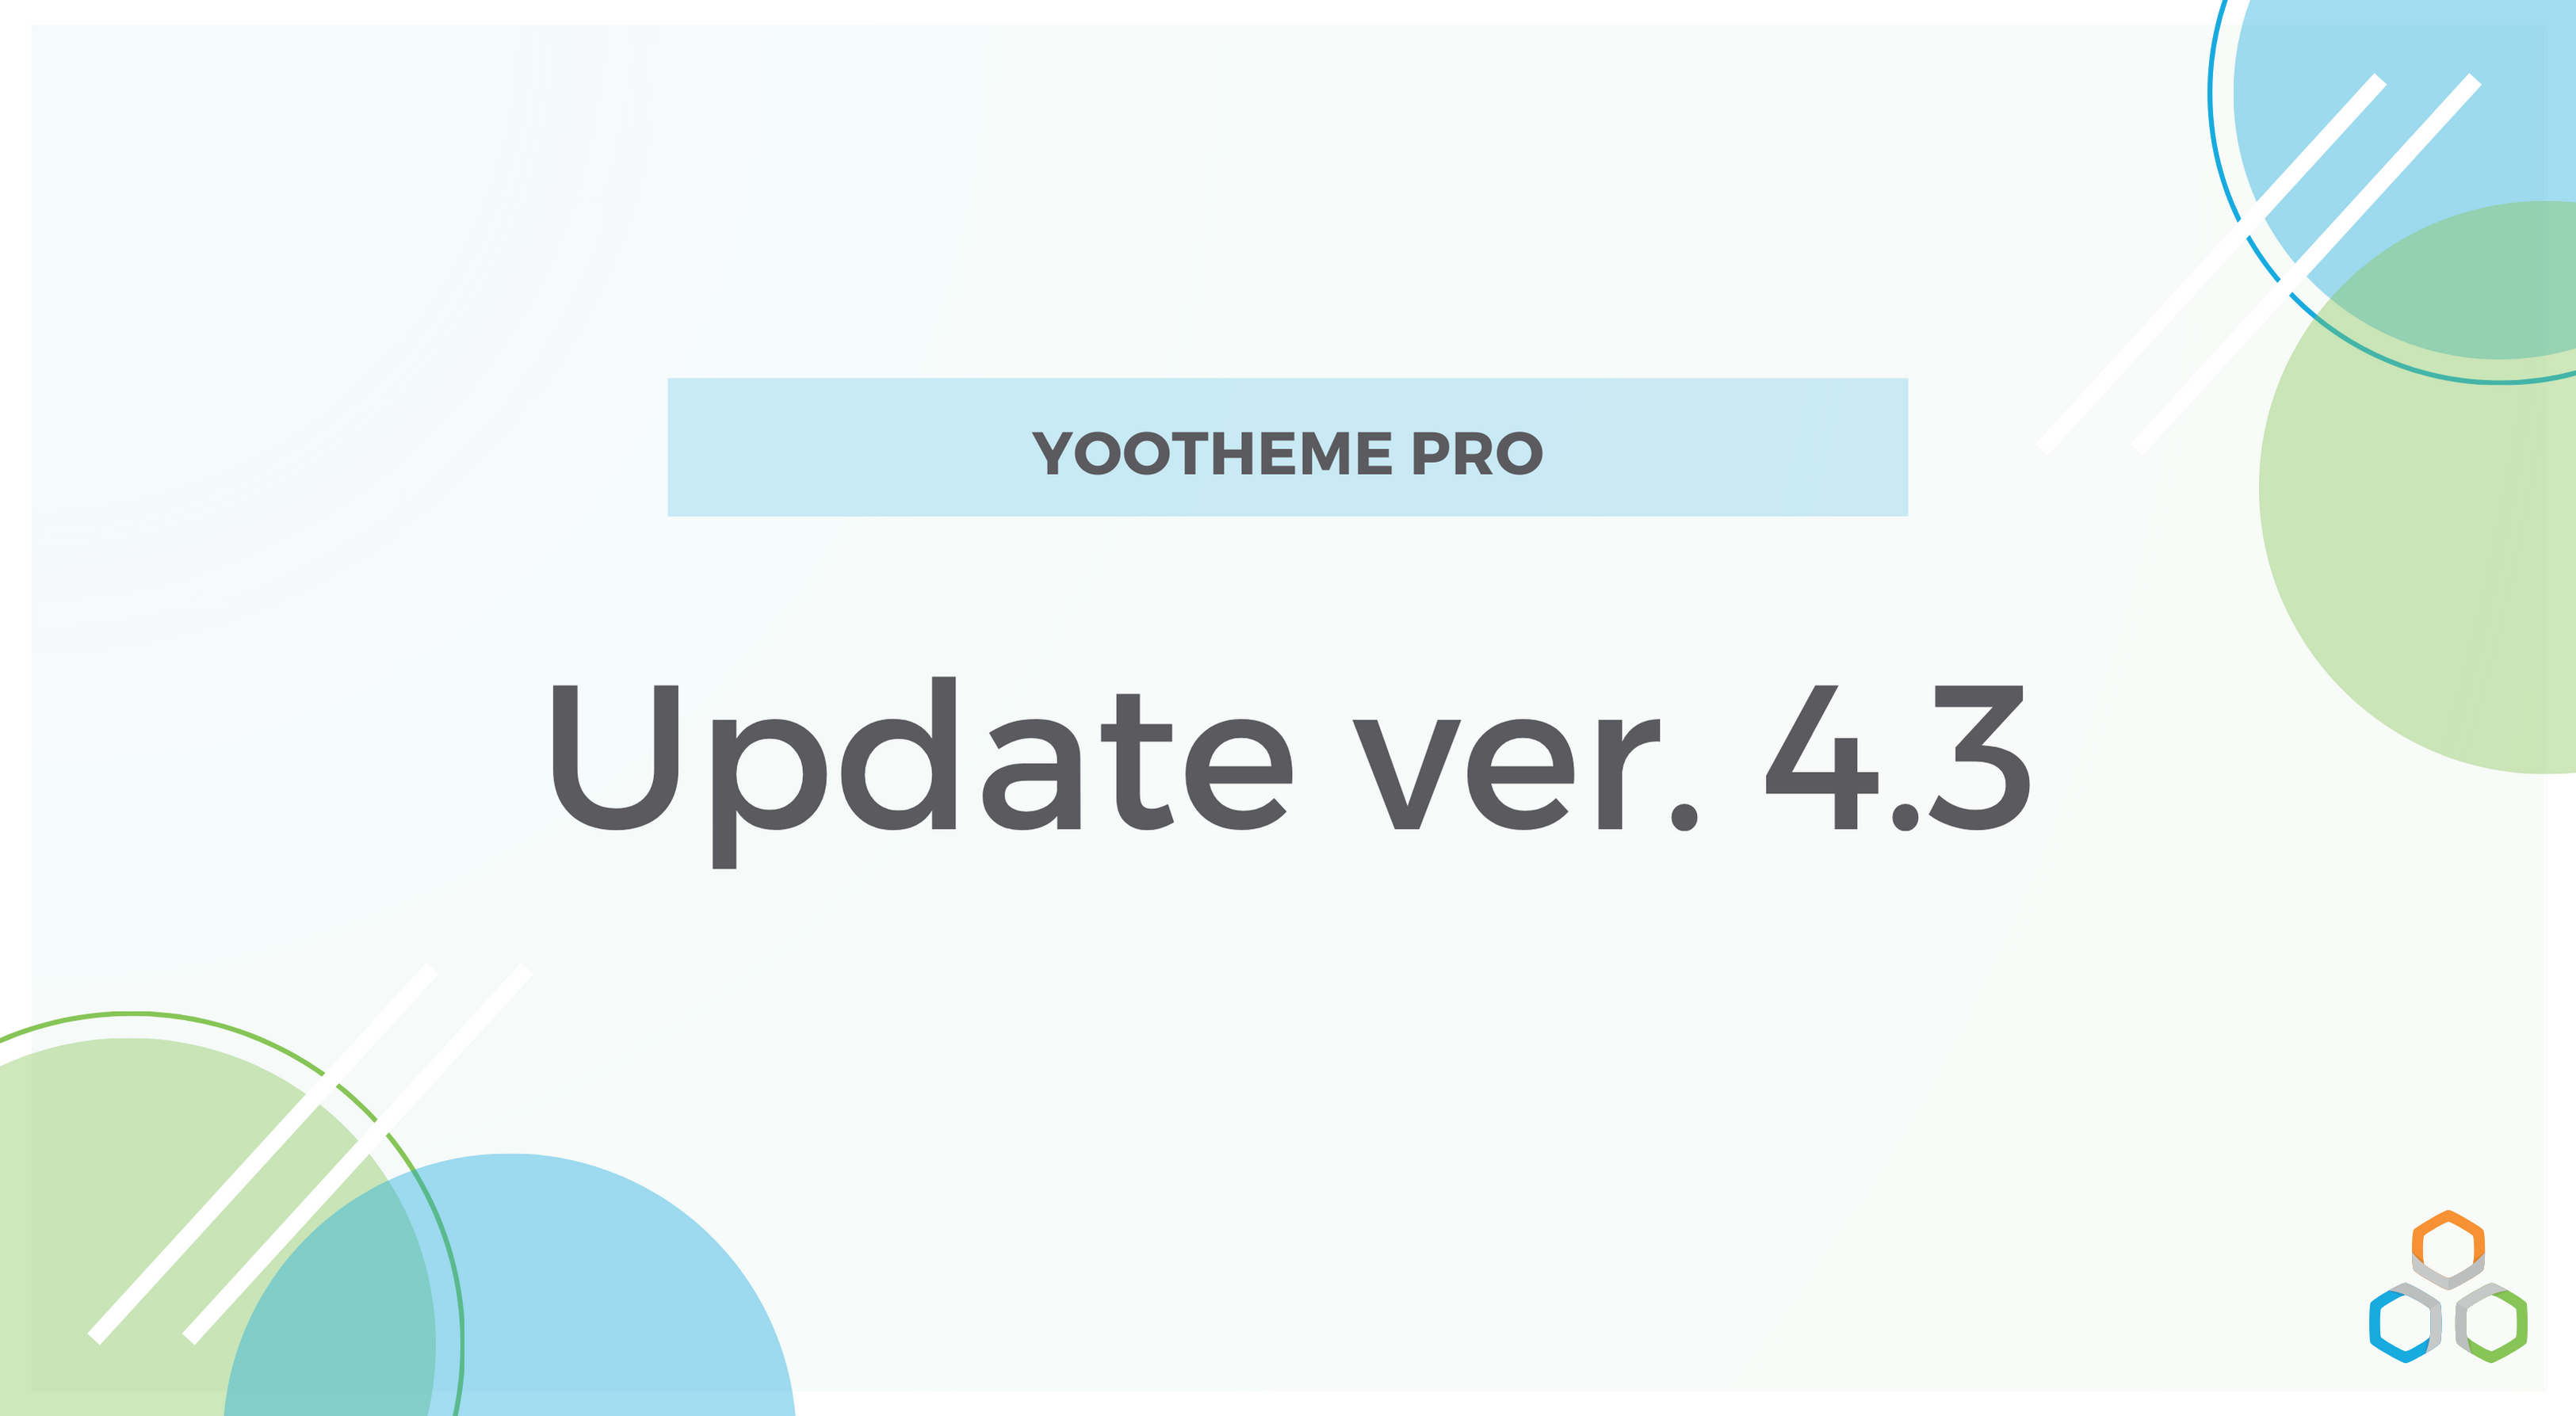 YOOtheme Pro update - meet new features introduced in the version 4.3